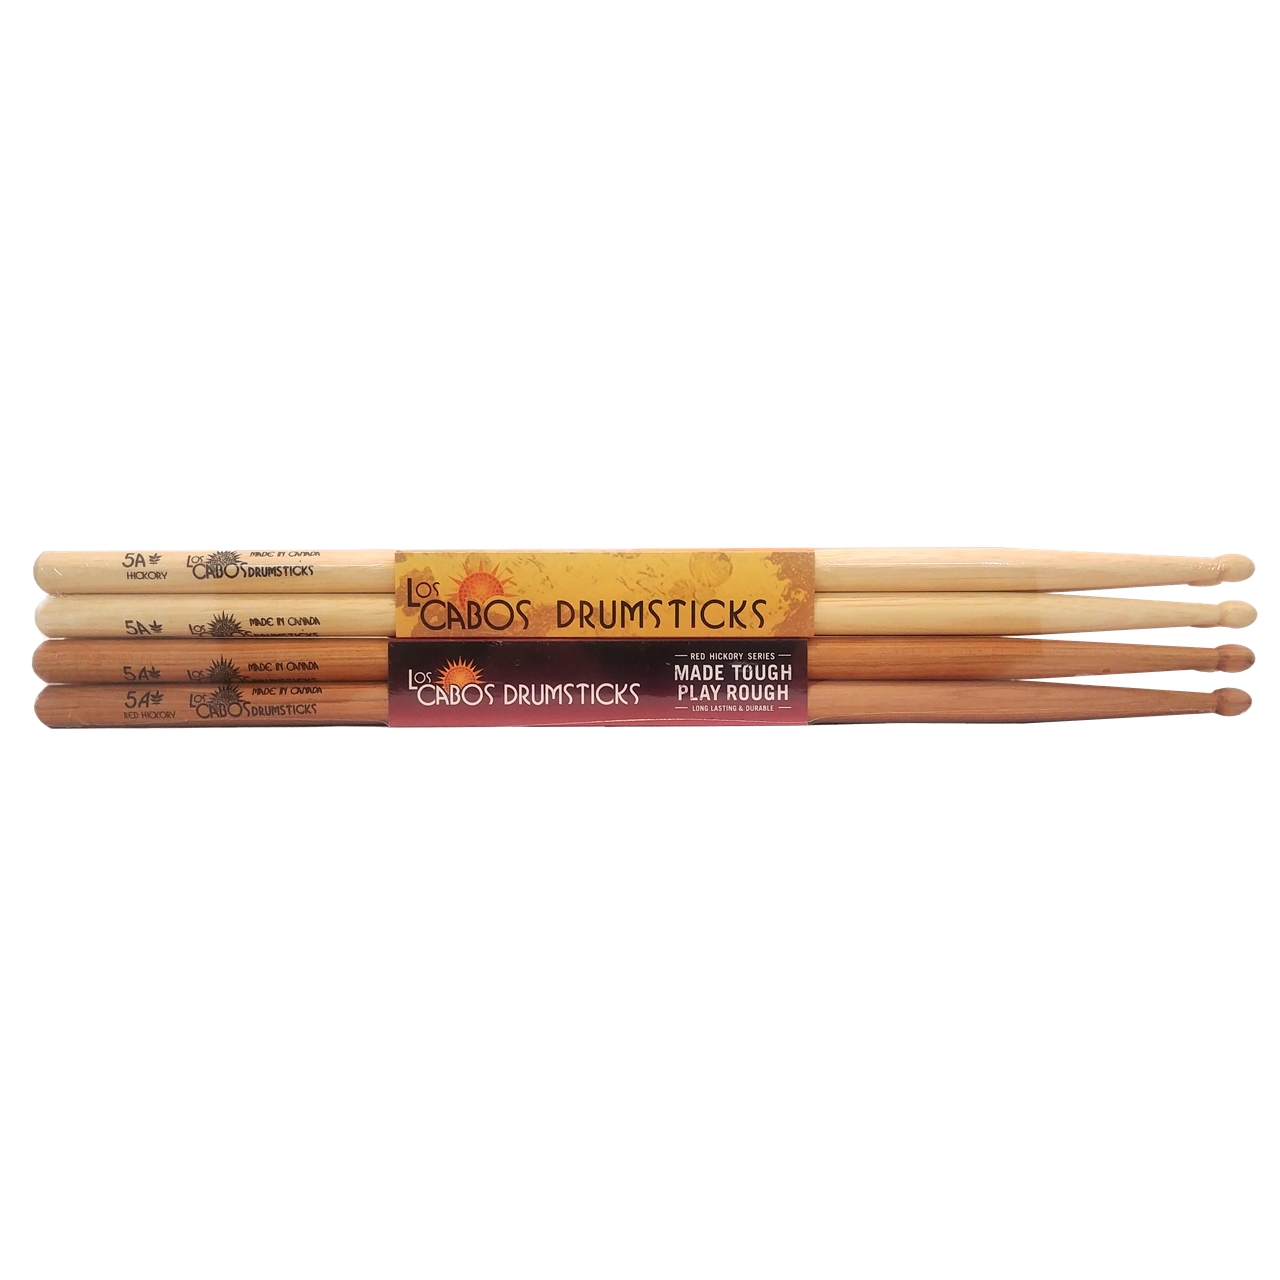 Los Cabos Drumstick 7A Hickory Pack